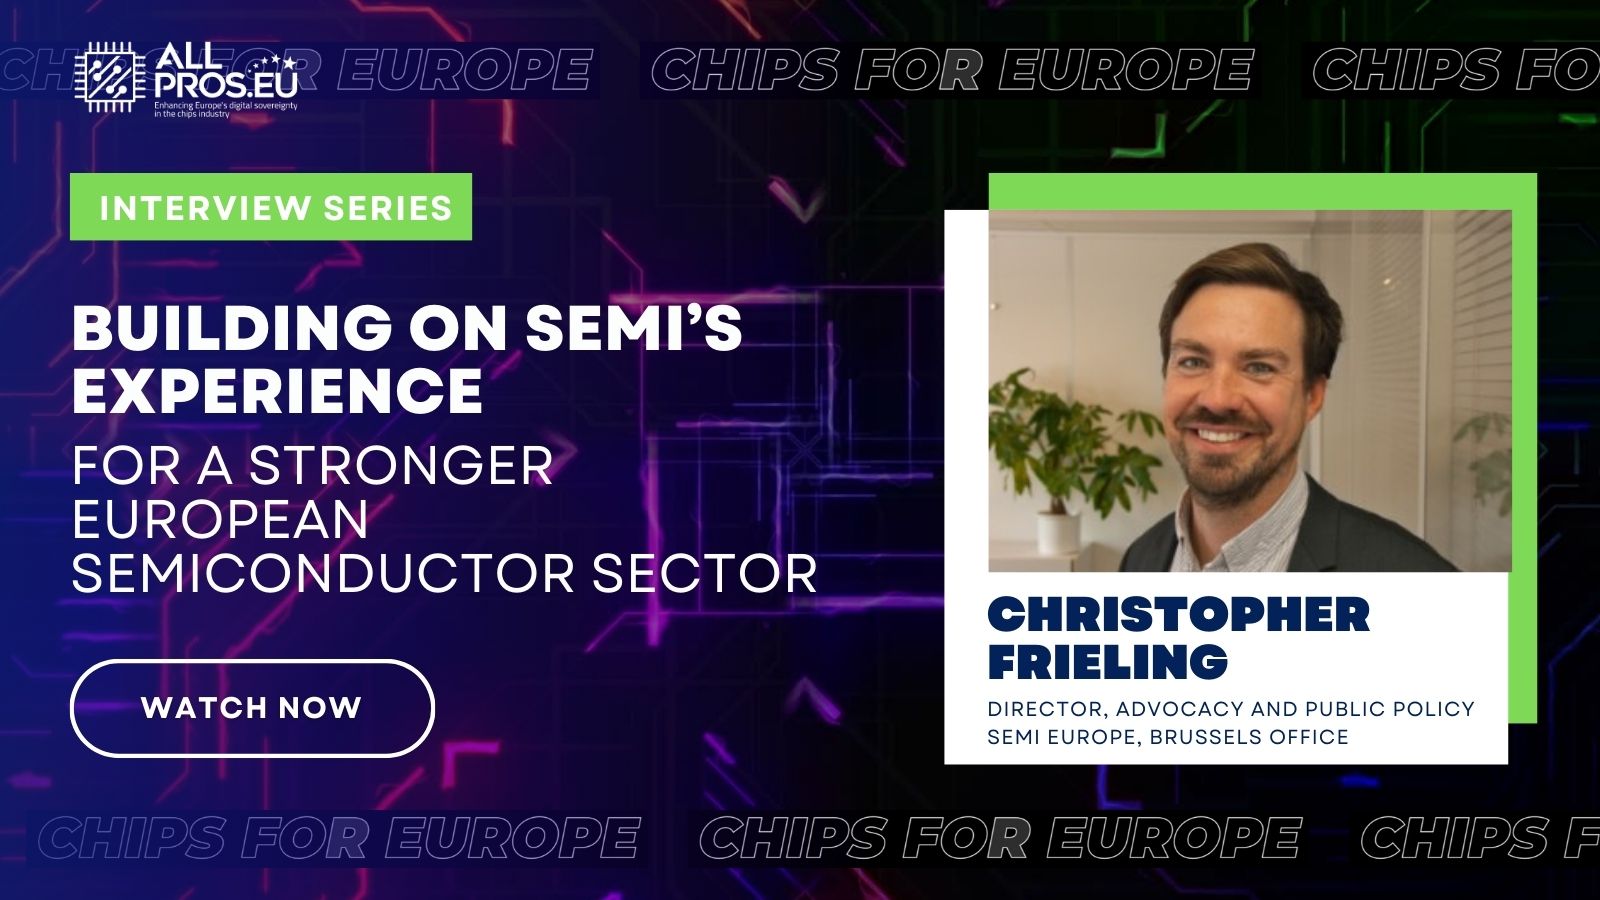 Christopher Frieling, Director at SEMI Europe